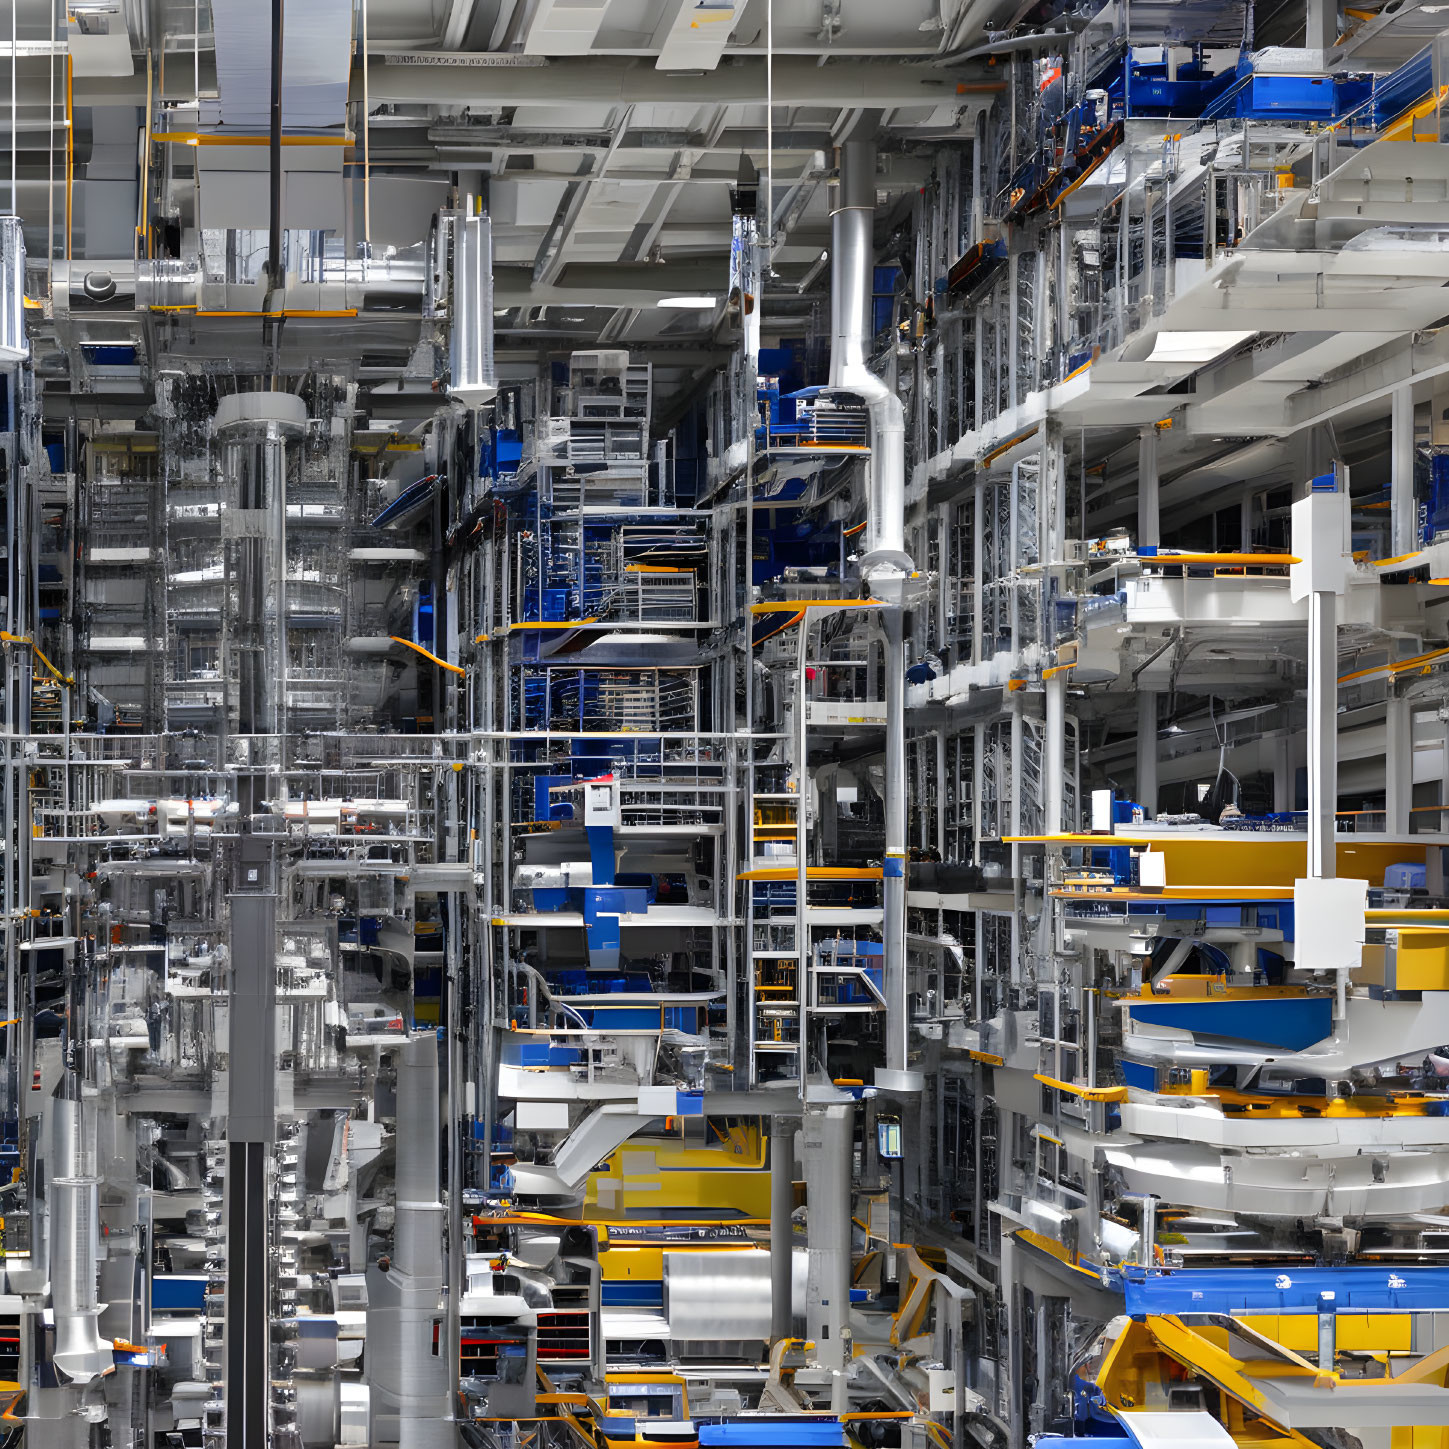 Vertical View of Dense Automated Warehouse with Multi-Level Metal Shelving